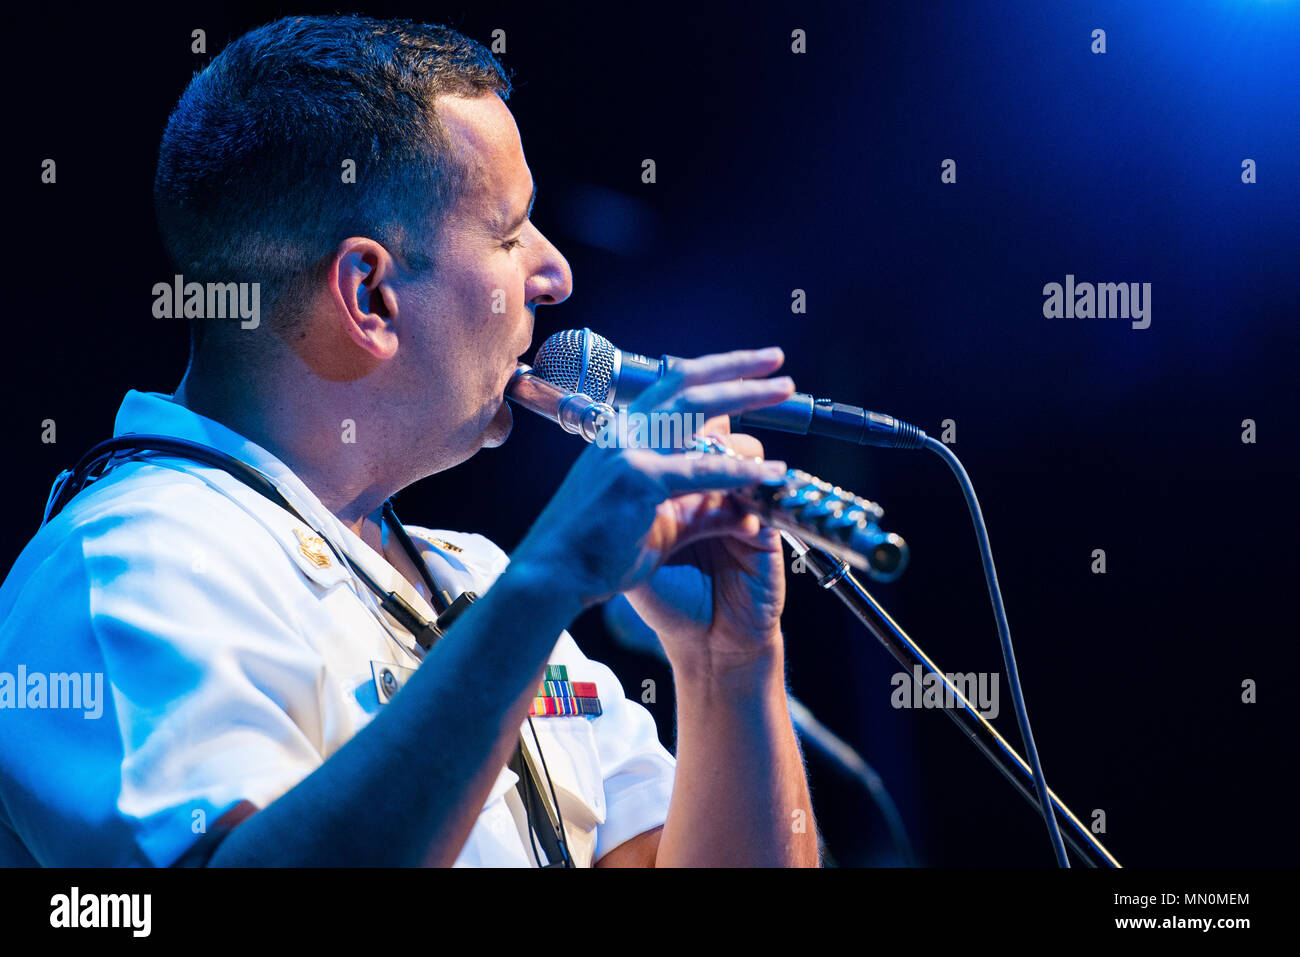 TOMBALL, Texas (Aug. 7, 2017) Musician 1st Class Manuel Pelayo De Gongora performs with the U.S. Navy Band Cruisers popular music group at the Lone Star College Performing Arts Center in Tomball, Texas. The U.S. Navy Band performed in four states during its 14-city national tour, connecting the Navy to communities that don't see Sailors at work on a regular basis. (U.S. Navy photo by Chief Musician Adam Grimm/Released) Stock Photo